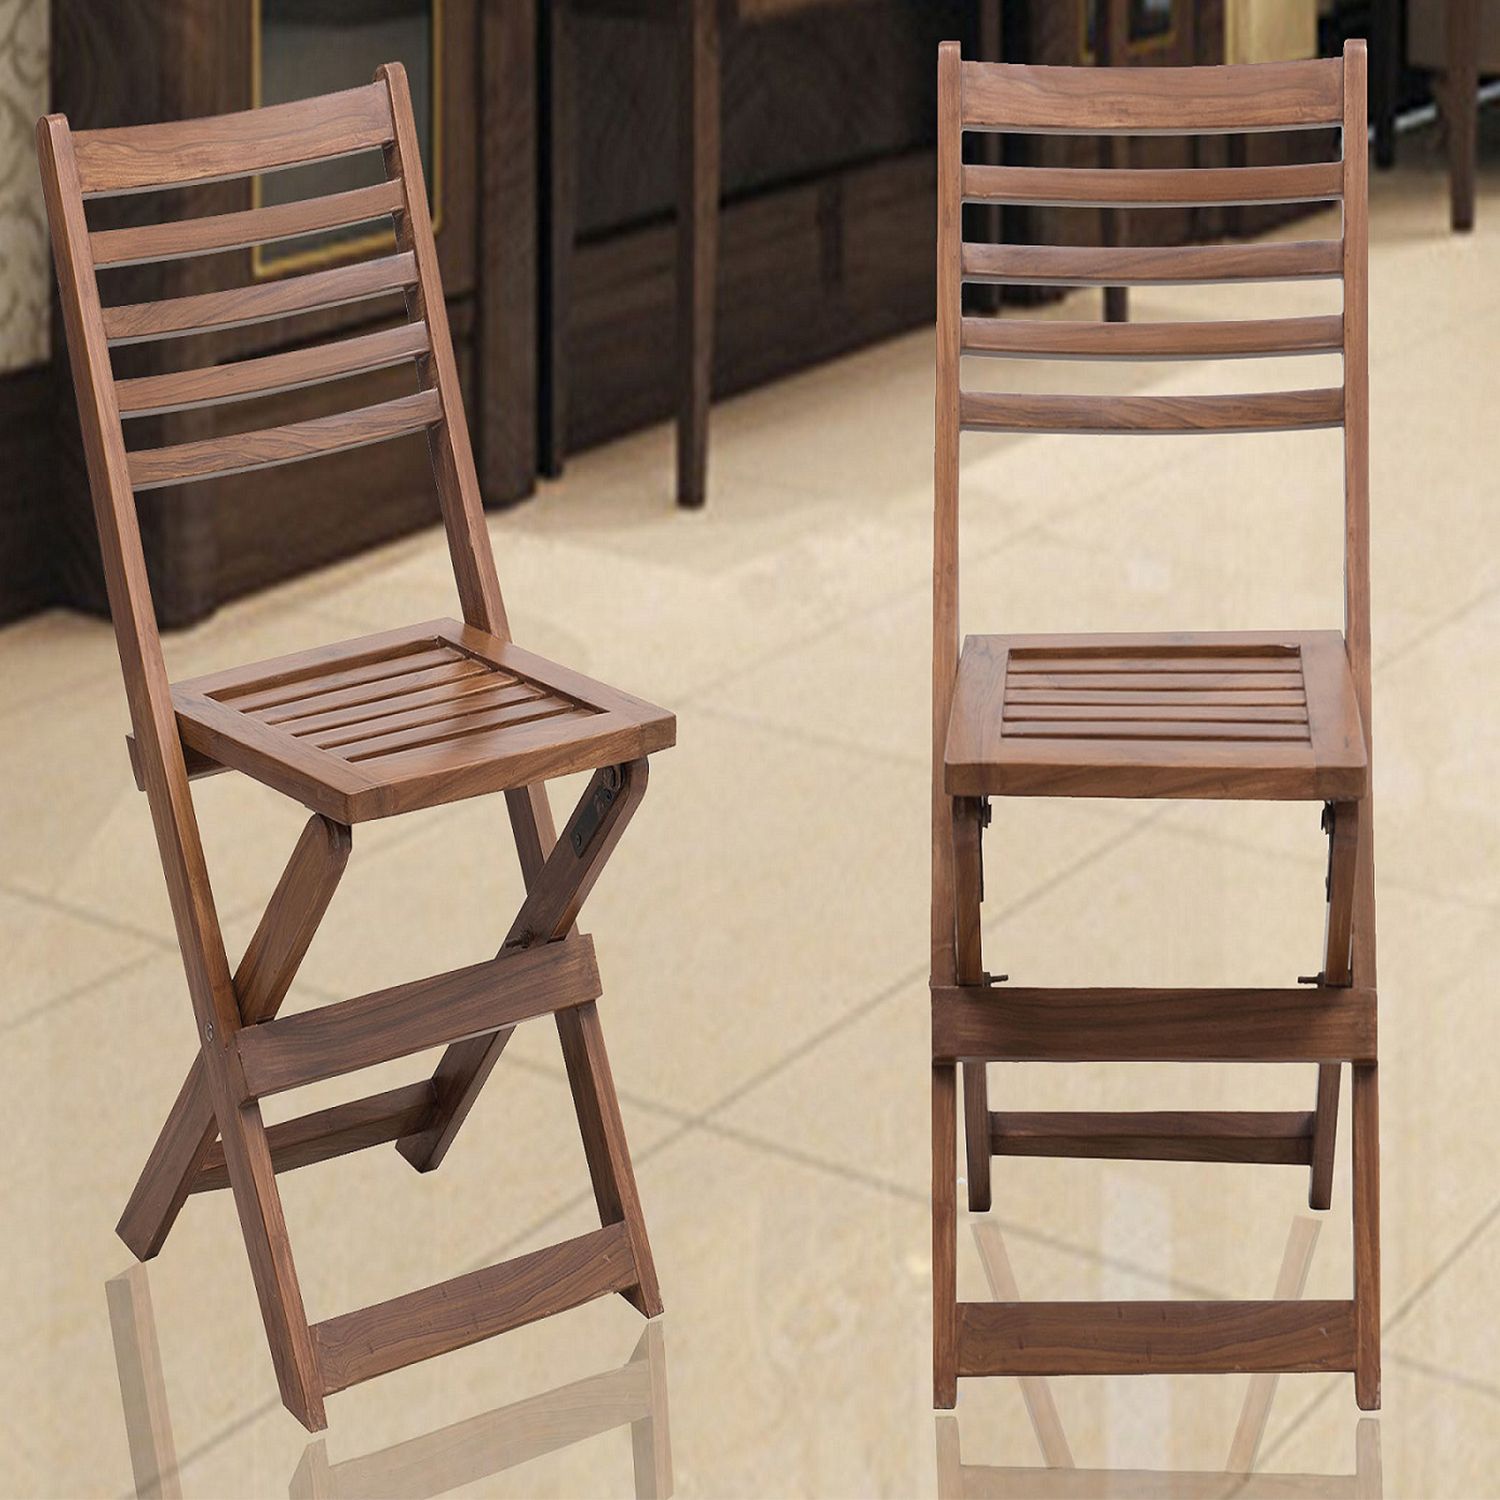 Benefits of Varied Folding Chairs to Please Your Seating Experience